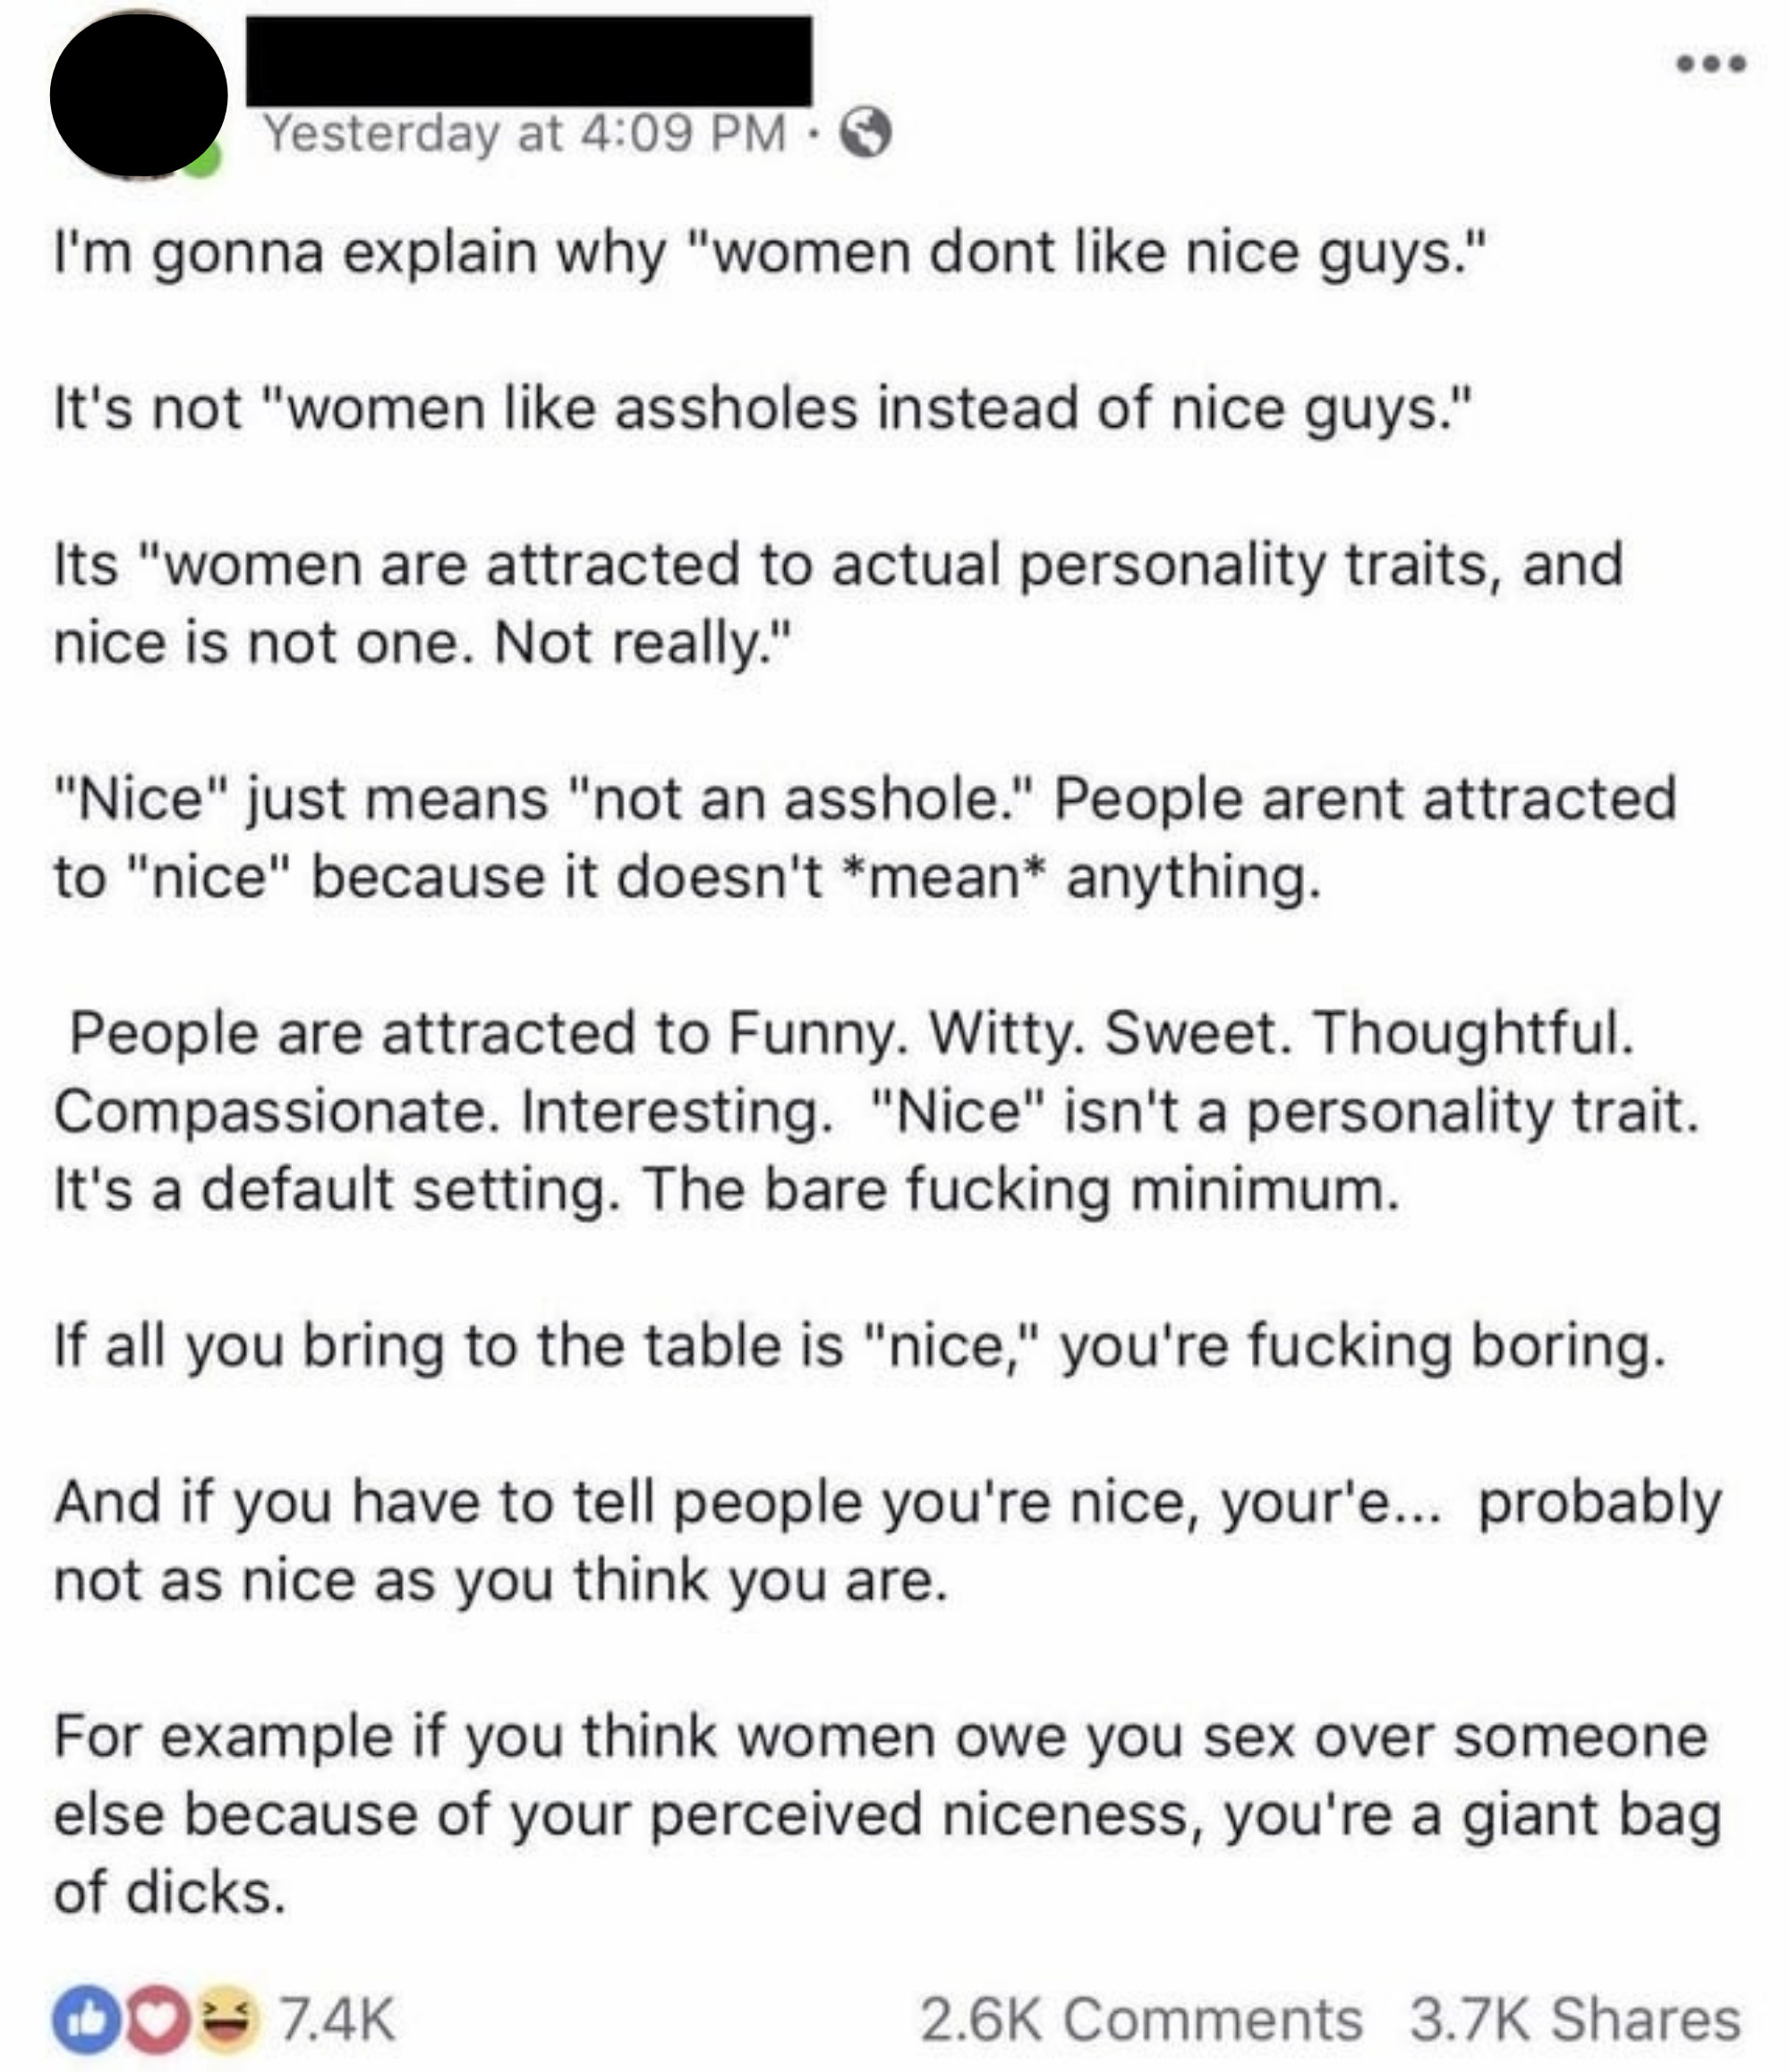 &quot;People aren&#x27;t attracted to &#x27;nice&#x27; because it doesn&#x27;t *mean* anything.&quot;